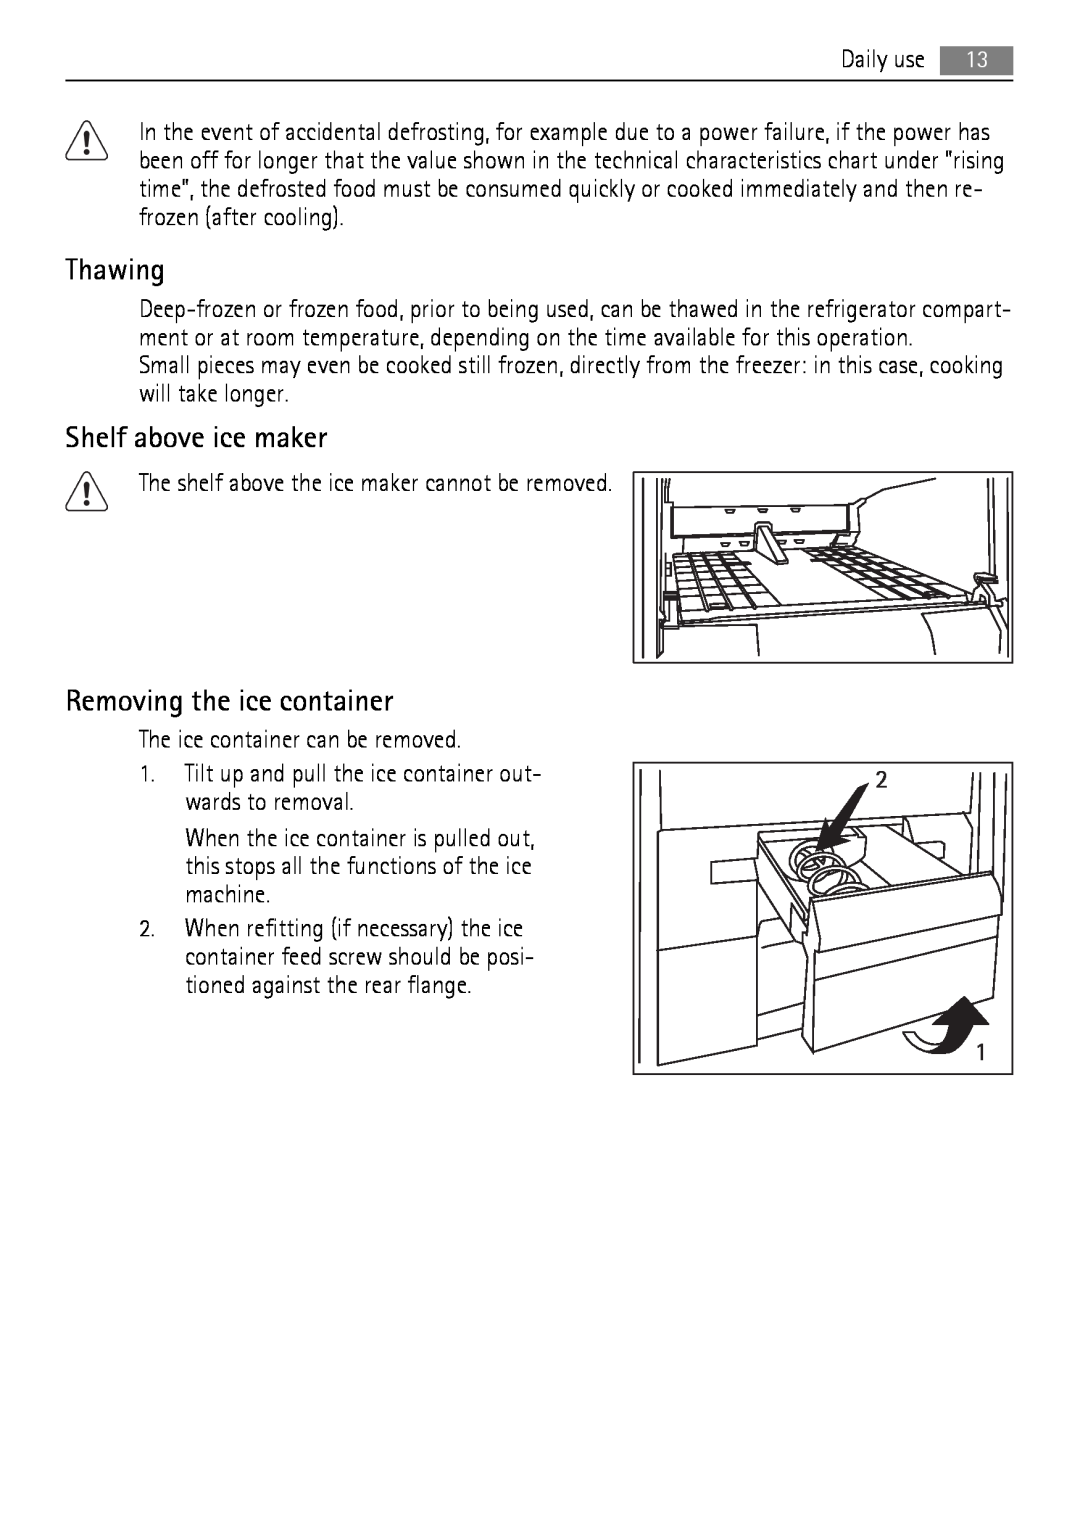 AEG A92860GNX0 user manual Thawing, Shelf above ice maker, Removing the ice container 